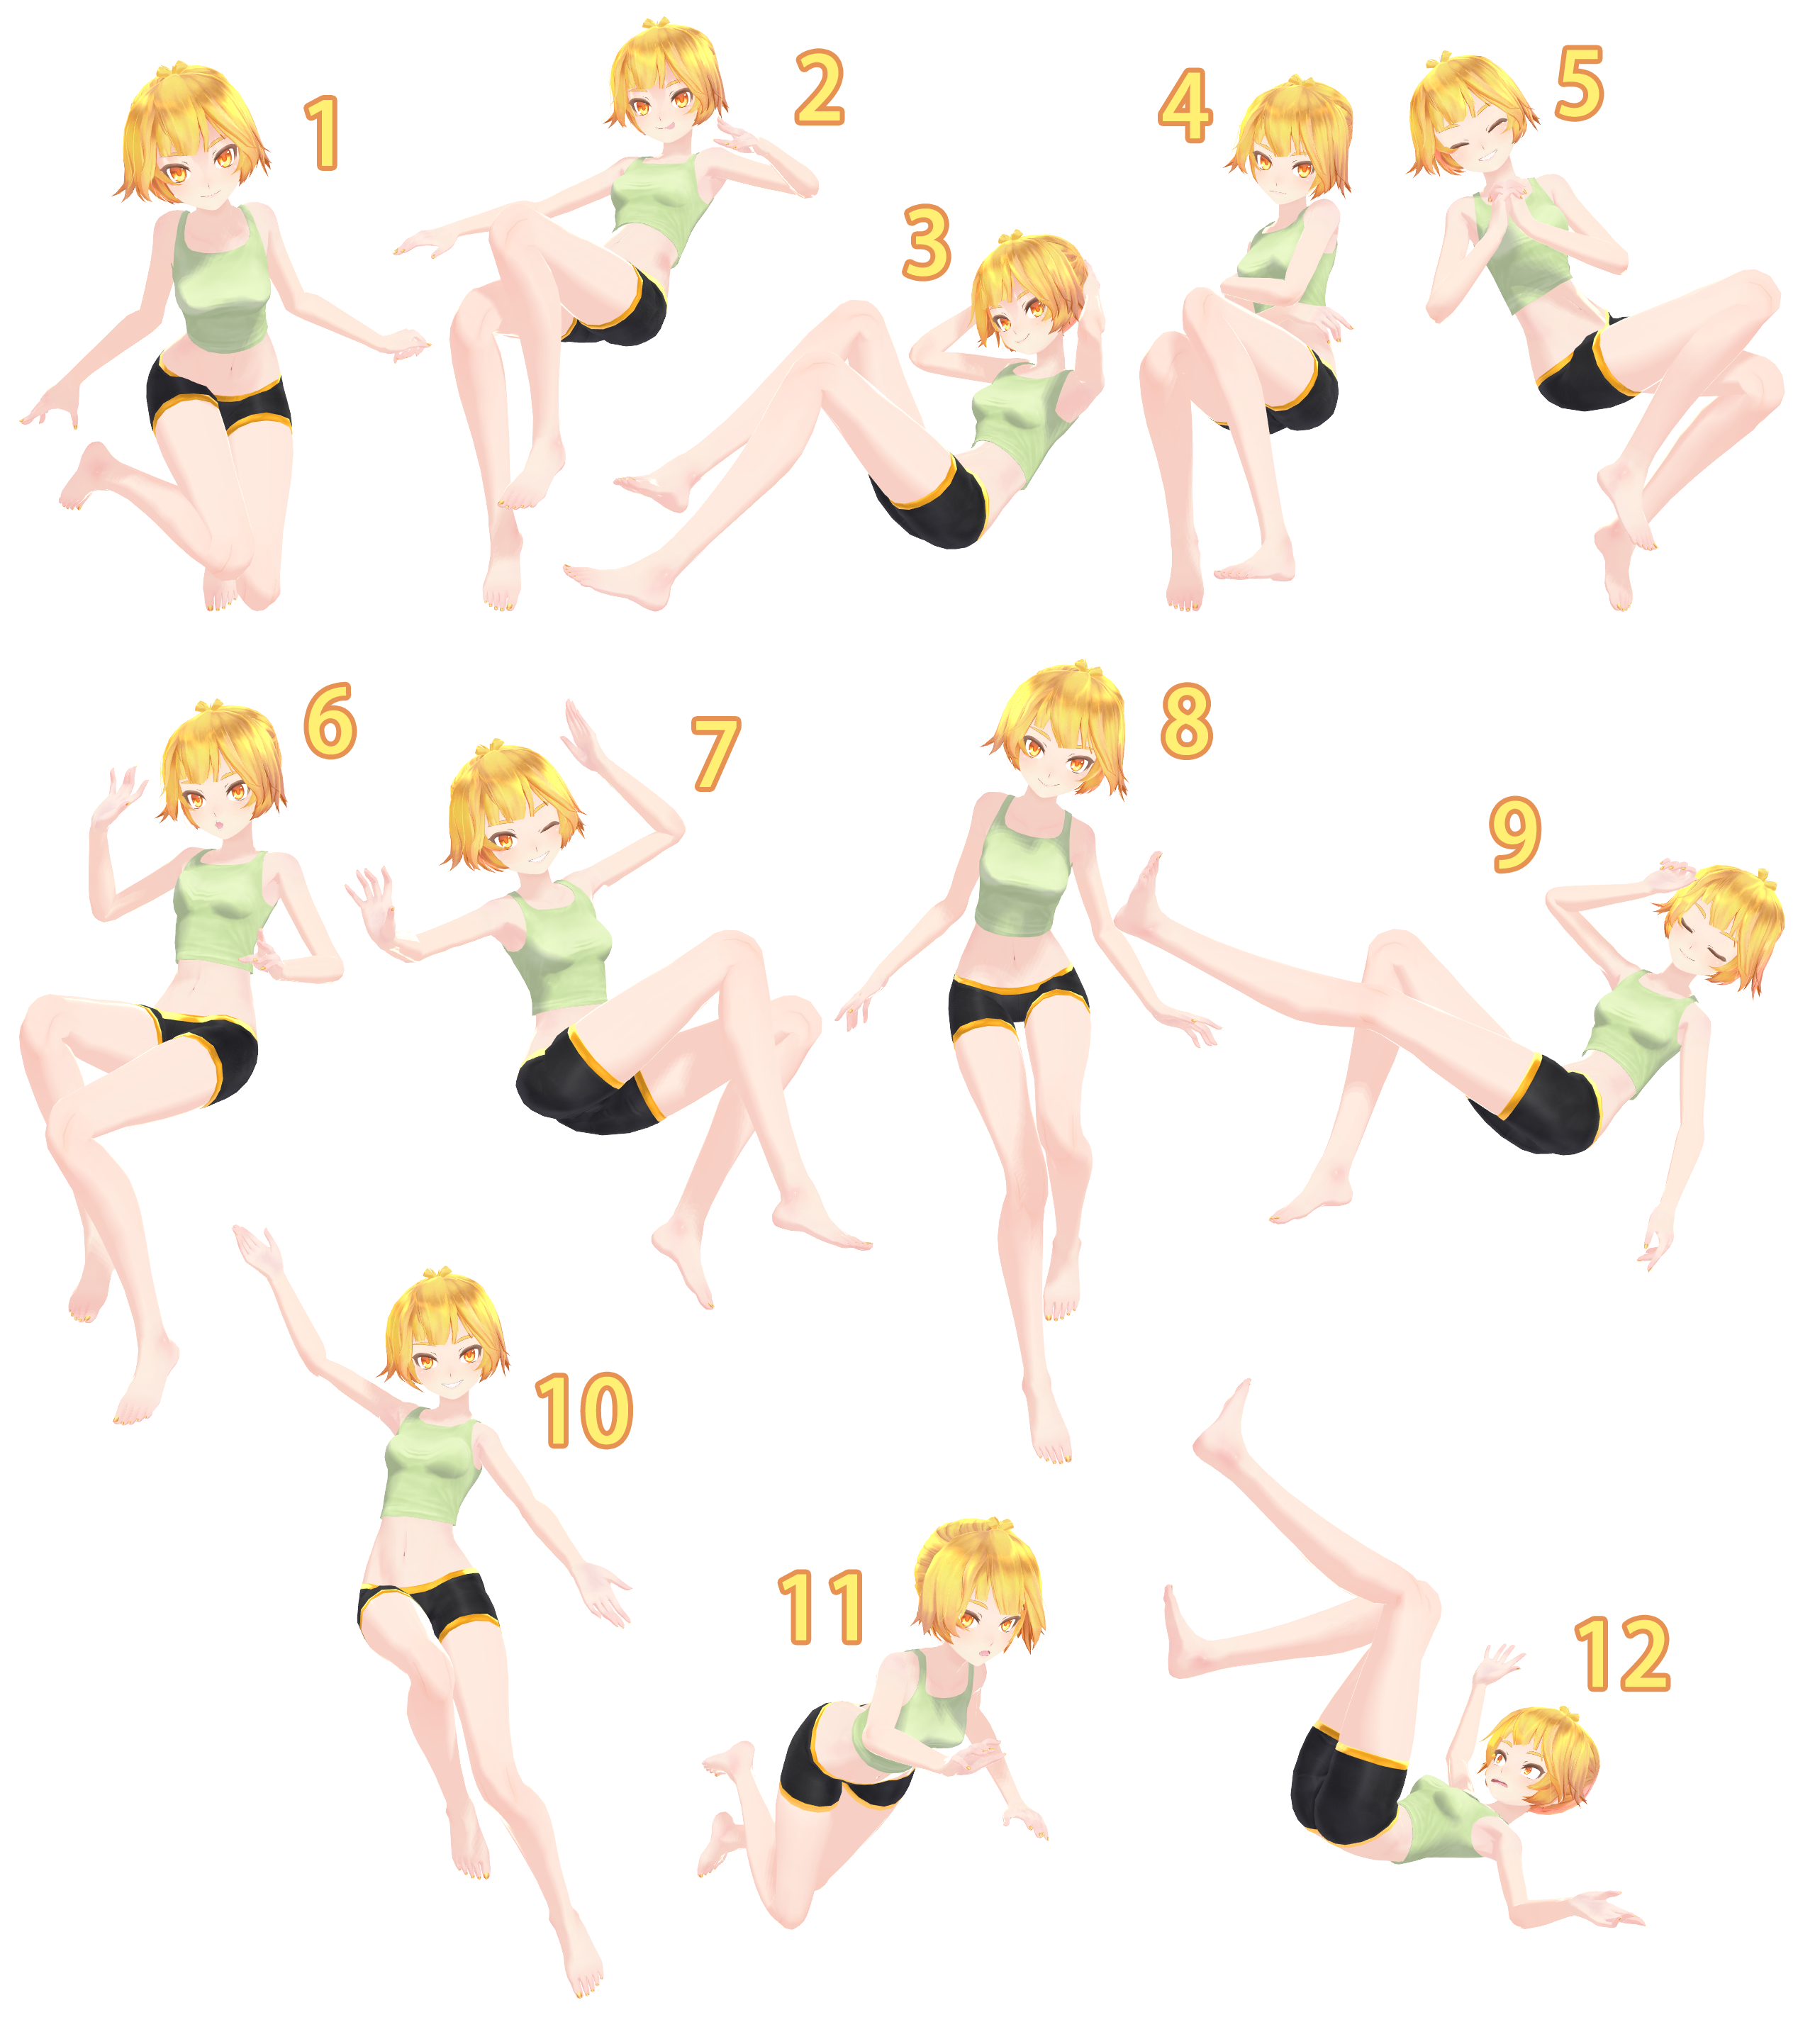 Mmd Floating Pose Pack Dl By Snorlaxin On Deviantart With that in mind i put together a library of images of cool models and poses for people to. mmd floating pose pack dl by